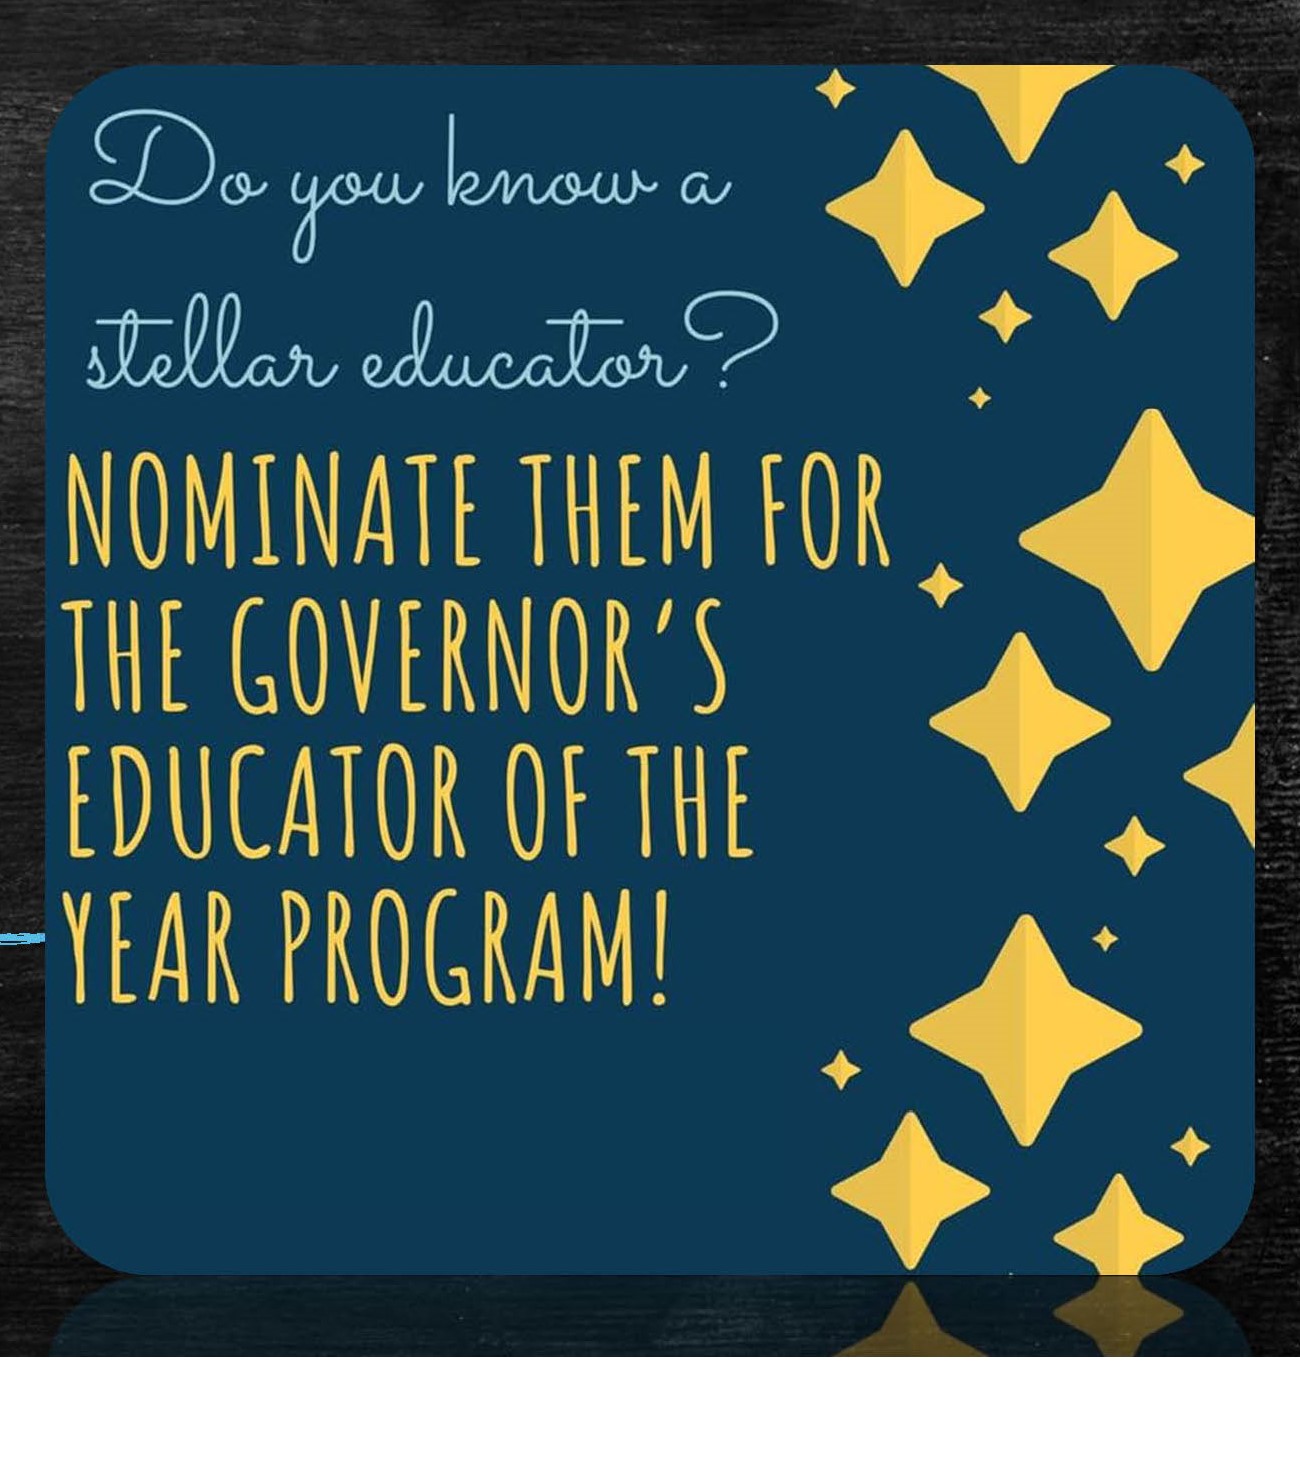 Governor's educator of the Year Program flyer